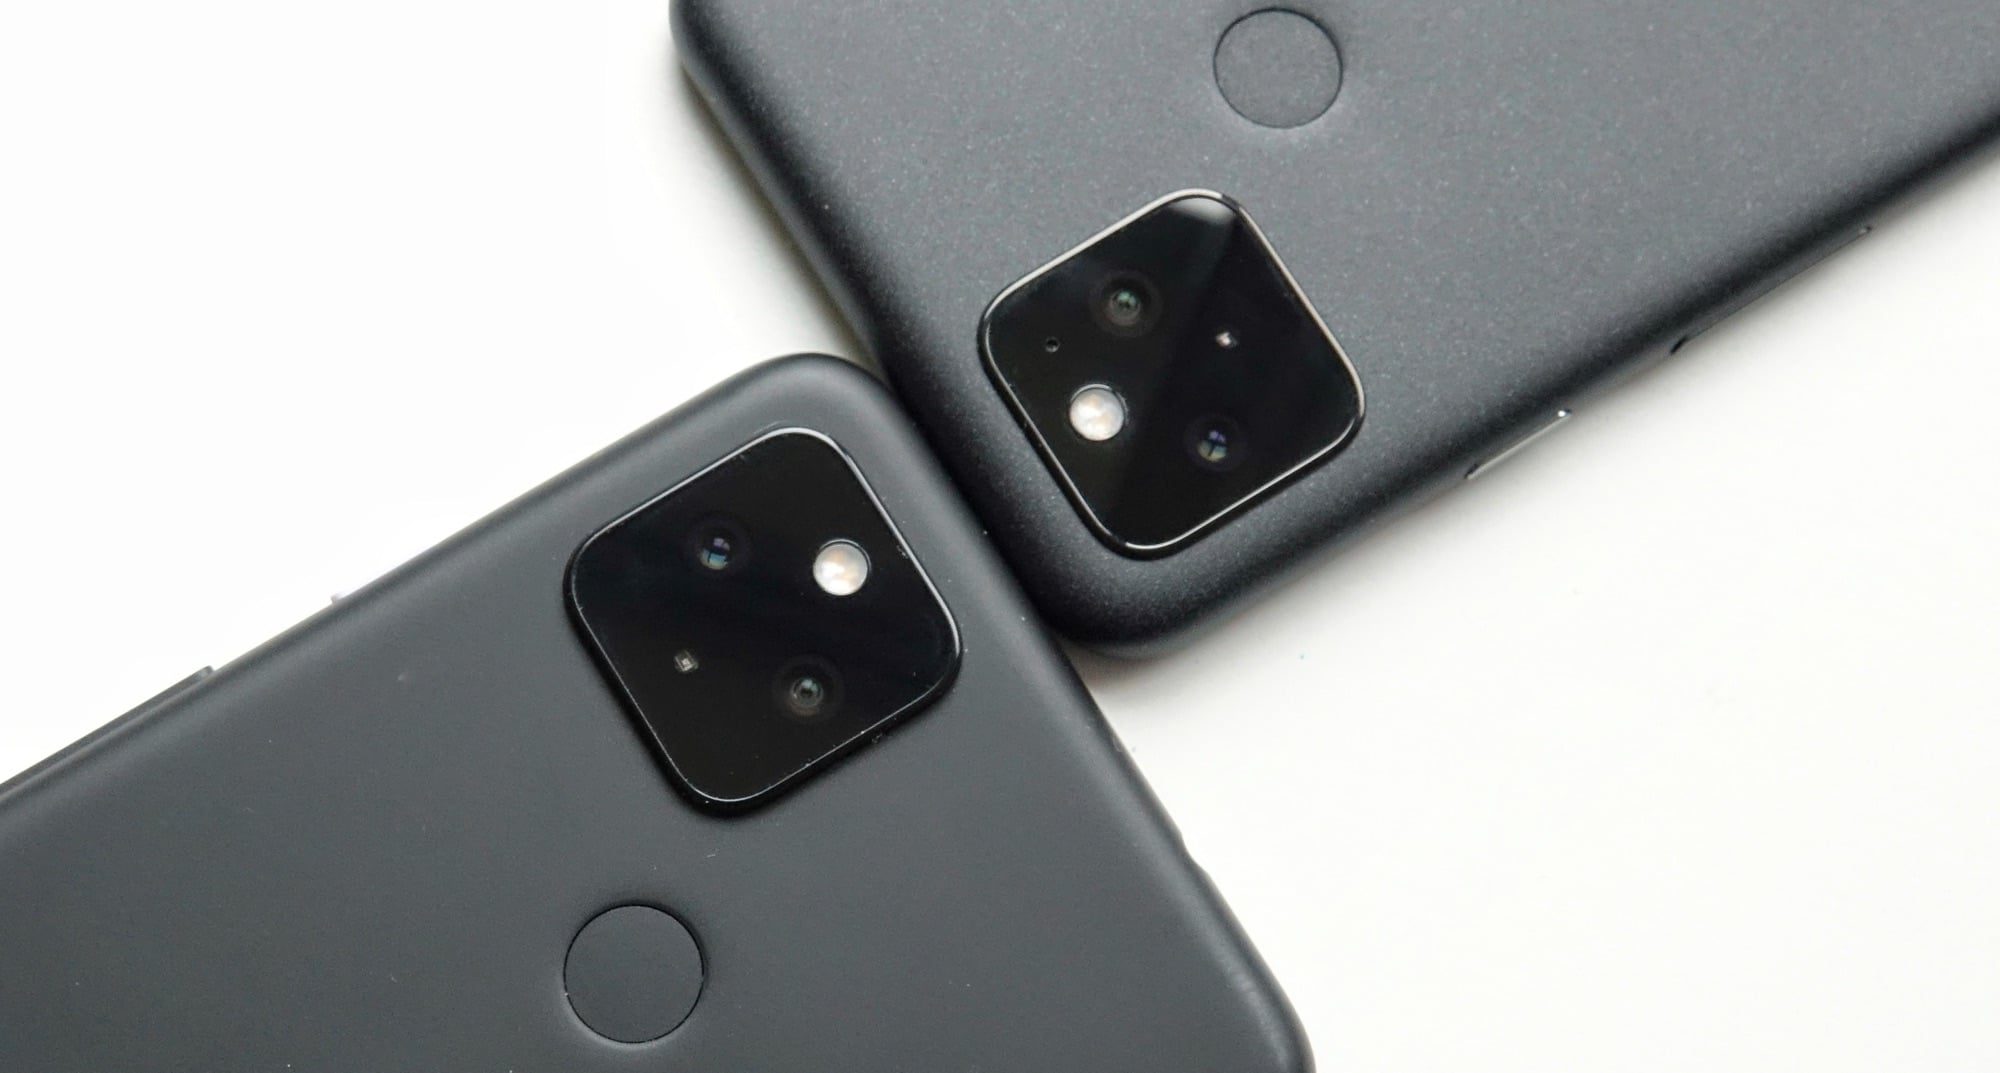 The cameras on the Pixel 4a with 5G (left) and the Pixel 5 (right).